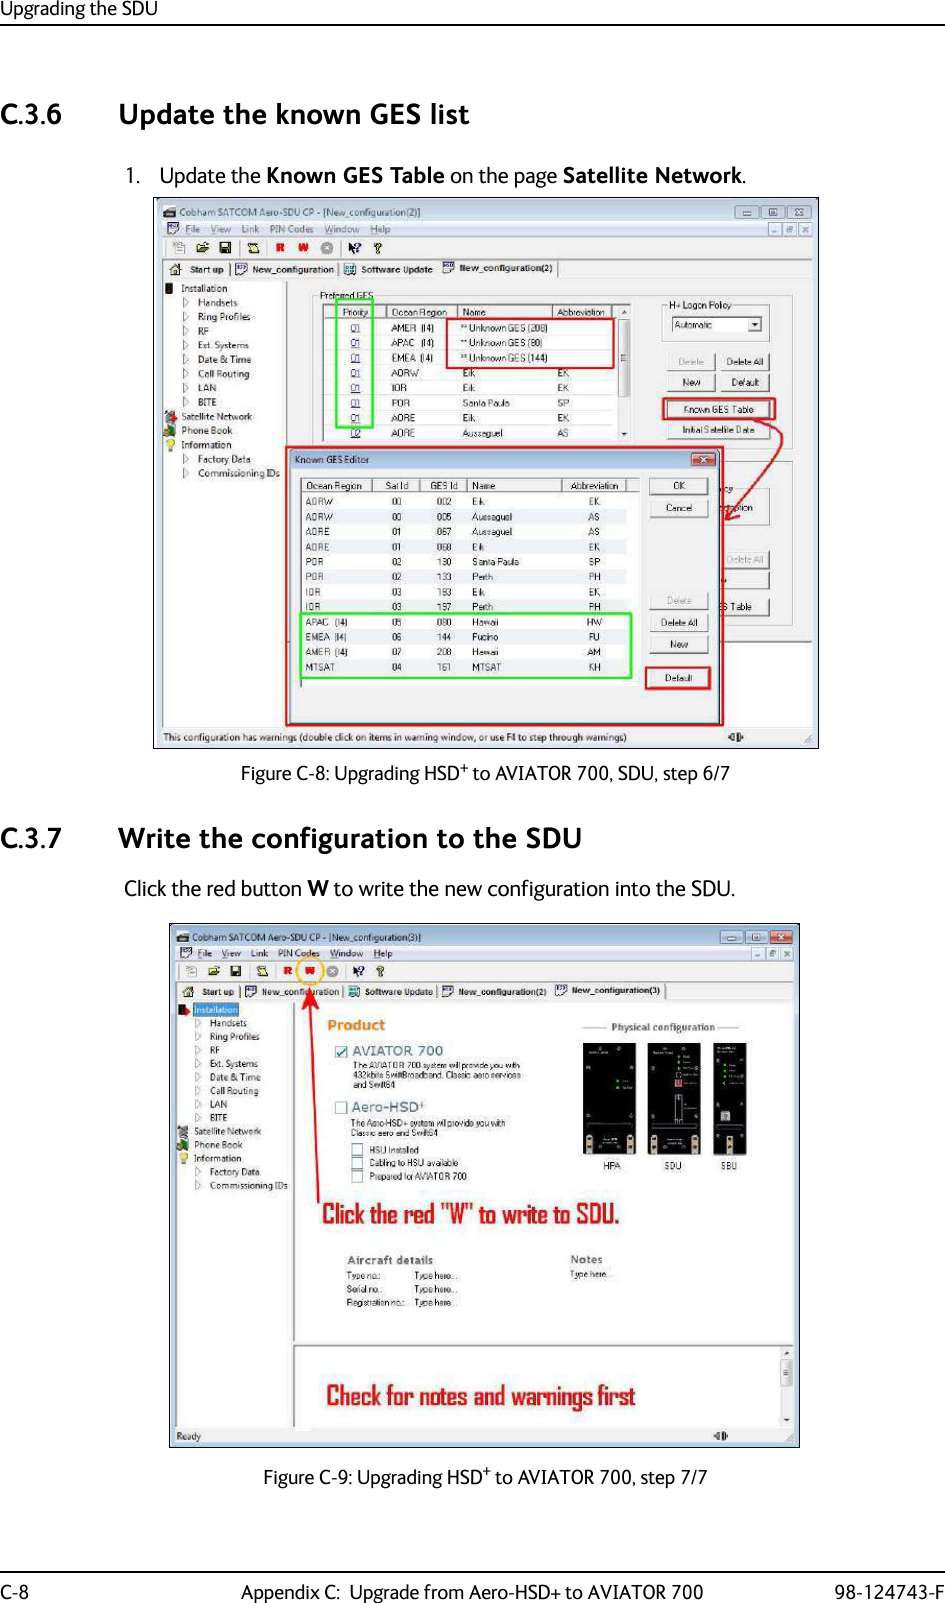 Upgrading the SDUC-8 Appendix C:  Upgrade from Aero-HSD+ to AVIATOR 700 98-124743-FC.3.6 Update the known GES list1. Update the Known GES Table on the page Satellite Network.Figure C-8: Upgrading HSD+ to AVIATOR 700, SDU, step 6/7C.3.7 Write the configuration to the SDUClick the red button W to write the new configuration into the SDU.Figure C-9: Upgrading HSD+ to AVIATOR 700, step 7/7